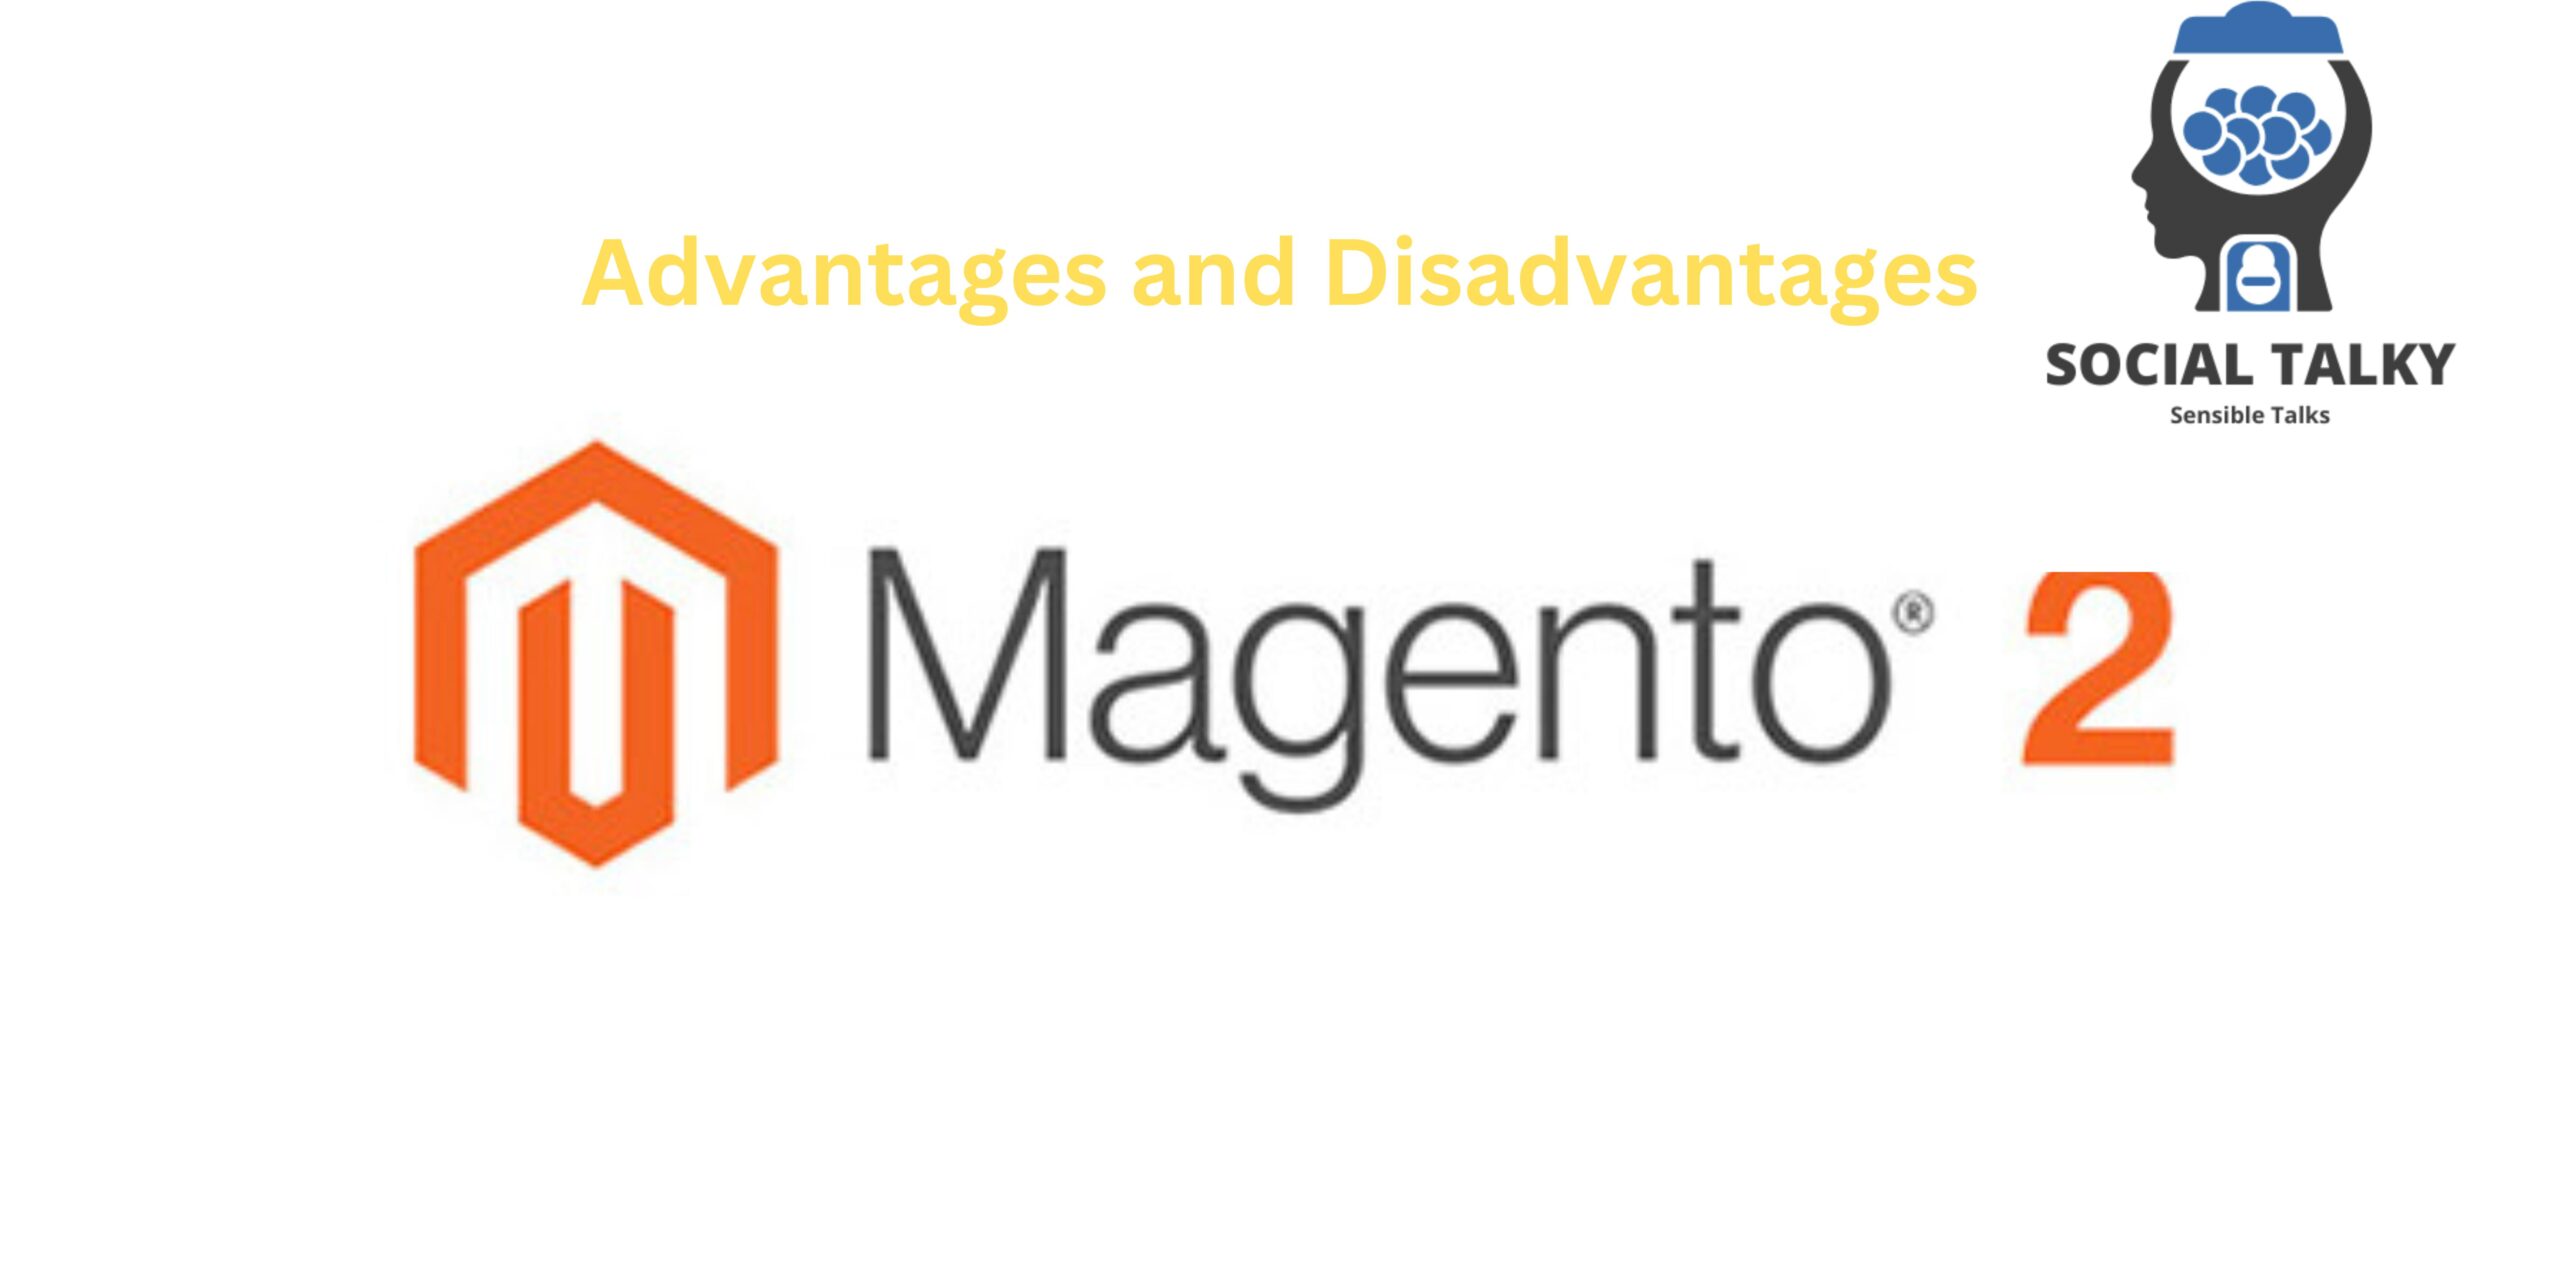 Advantages and Disadvantages of Magento 2